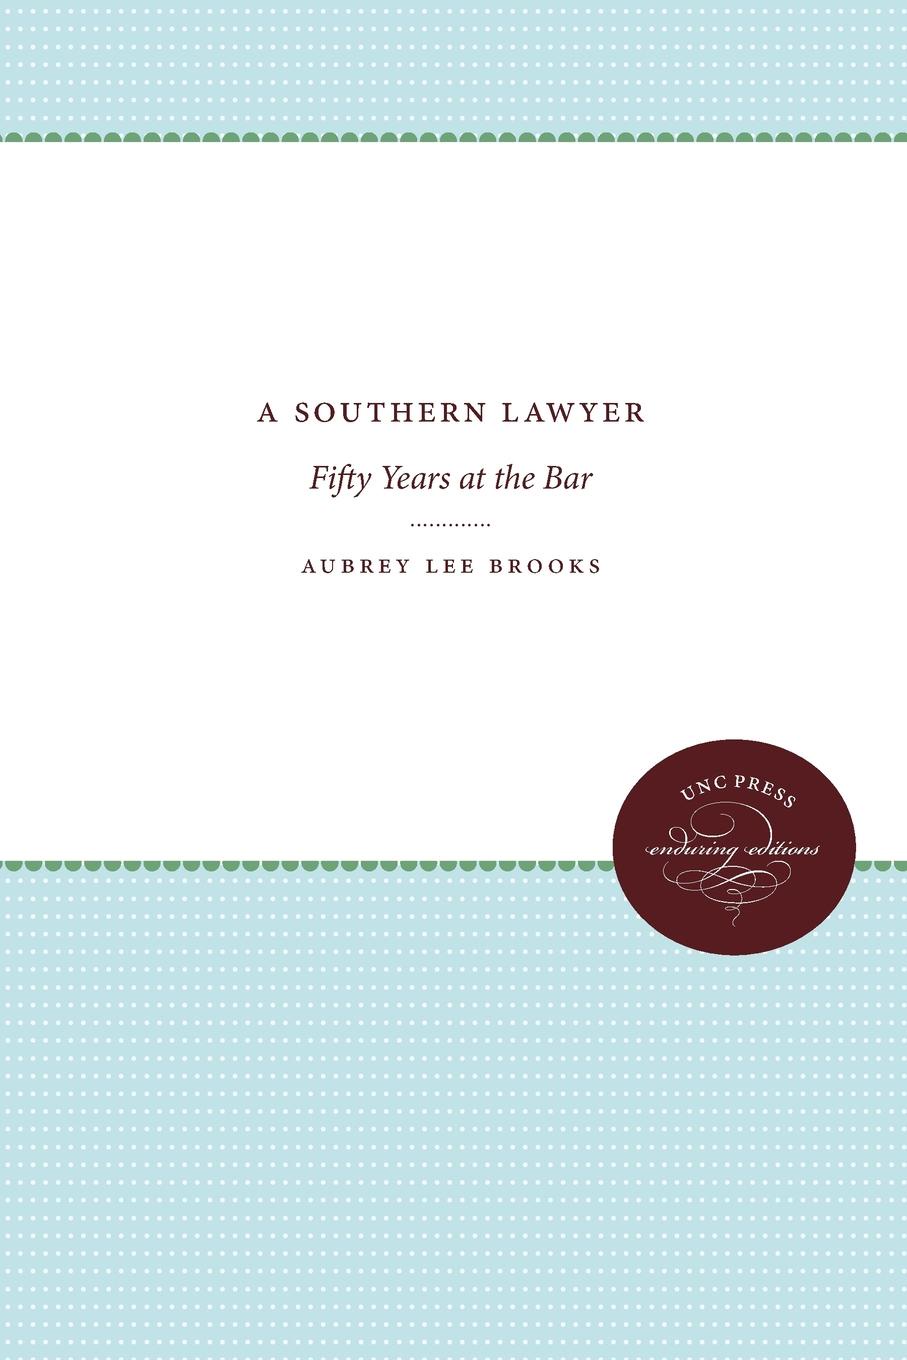 A Southern Lawyer. Fifty Years at the Bar